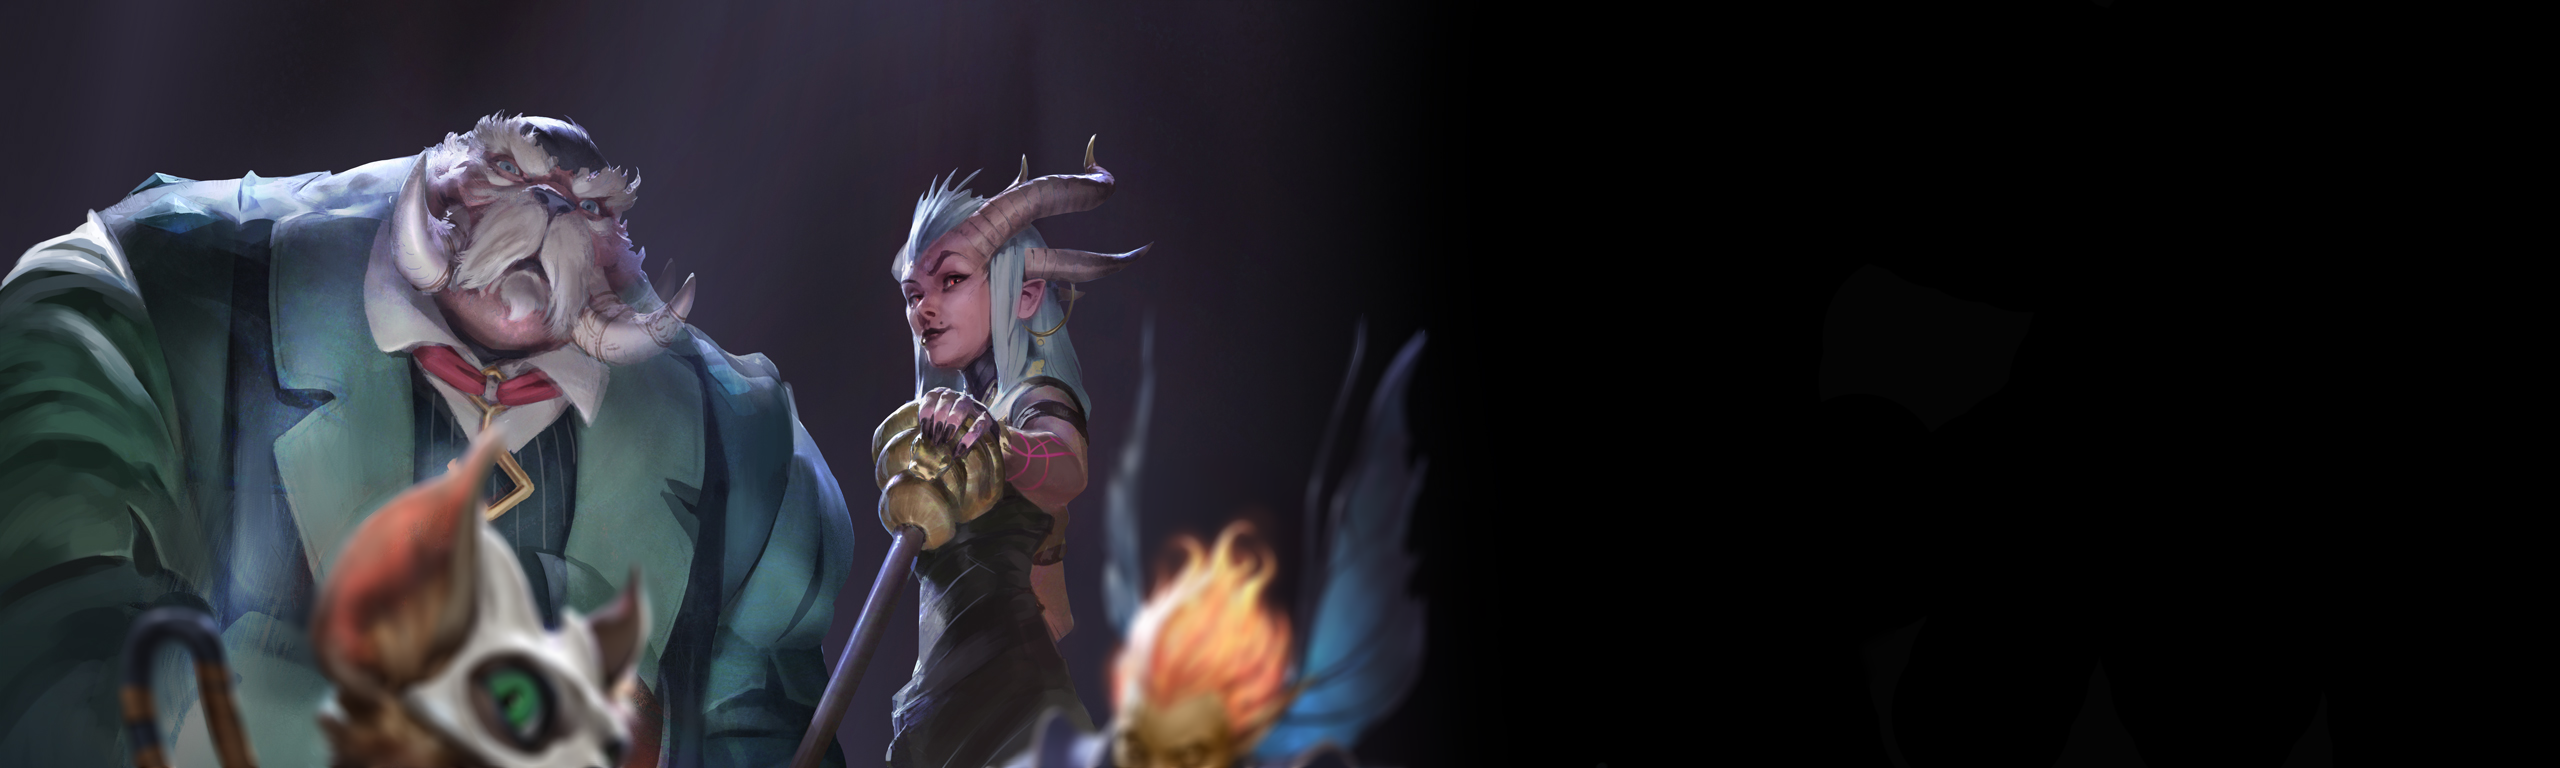 Dota Underlords - Background.png